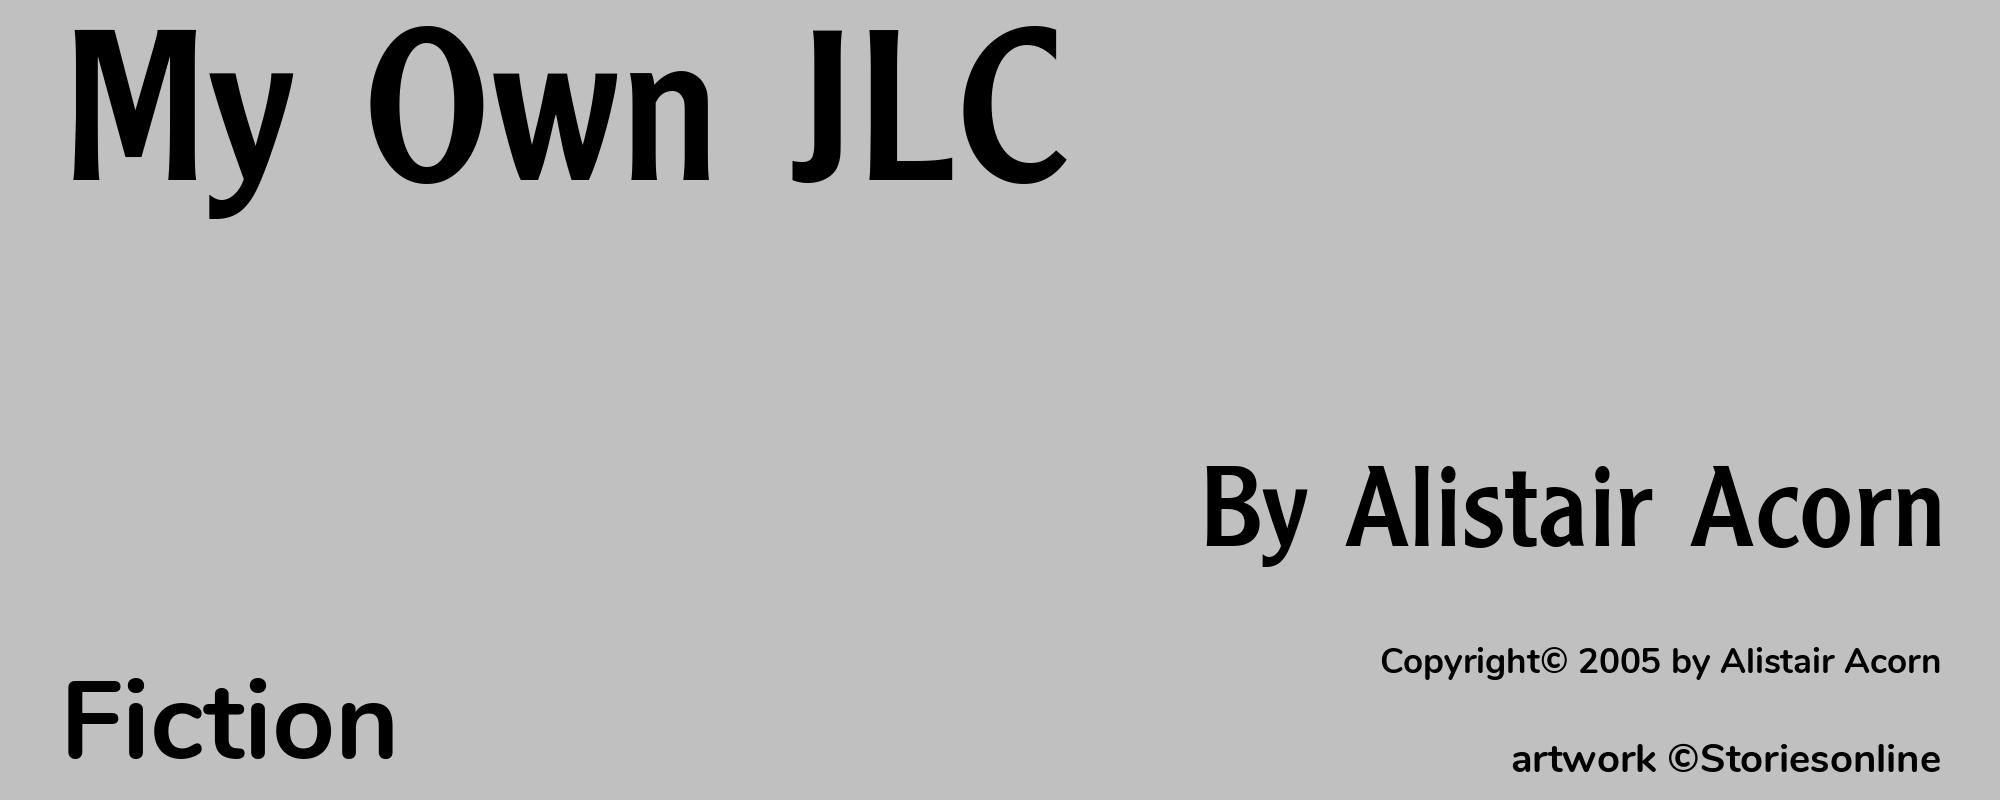 My Own JLC - Cover